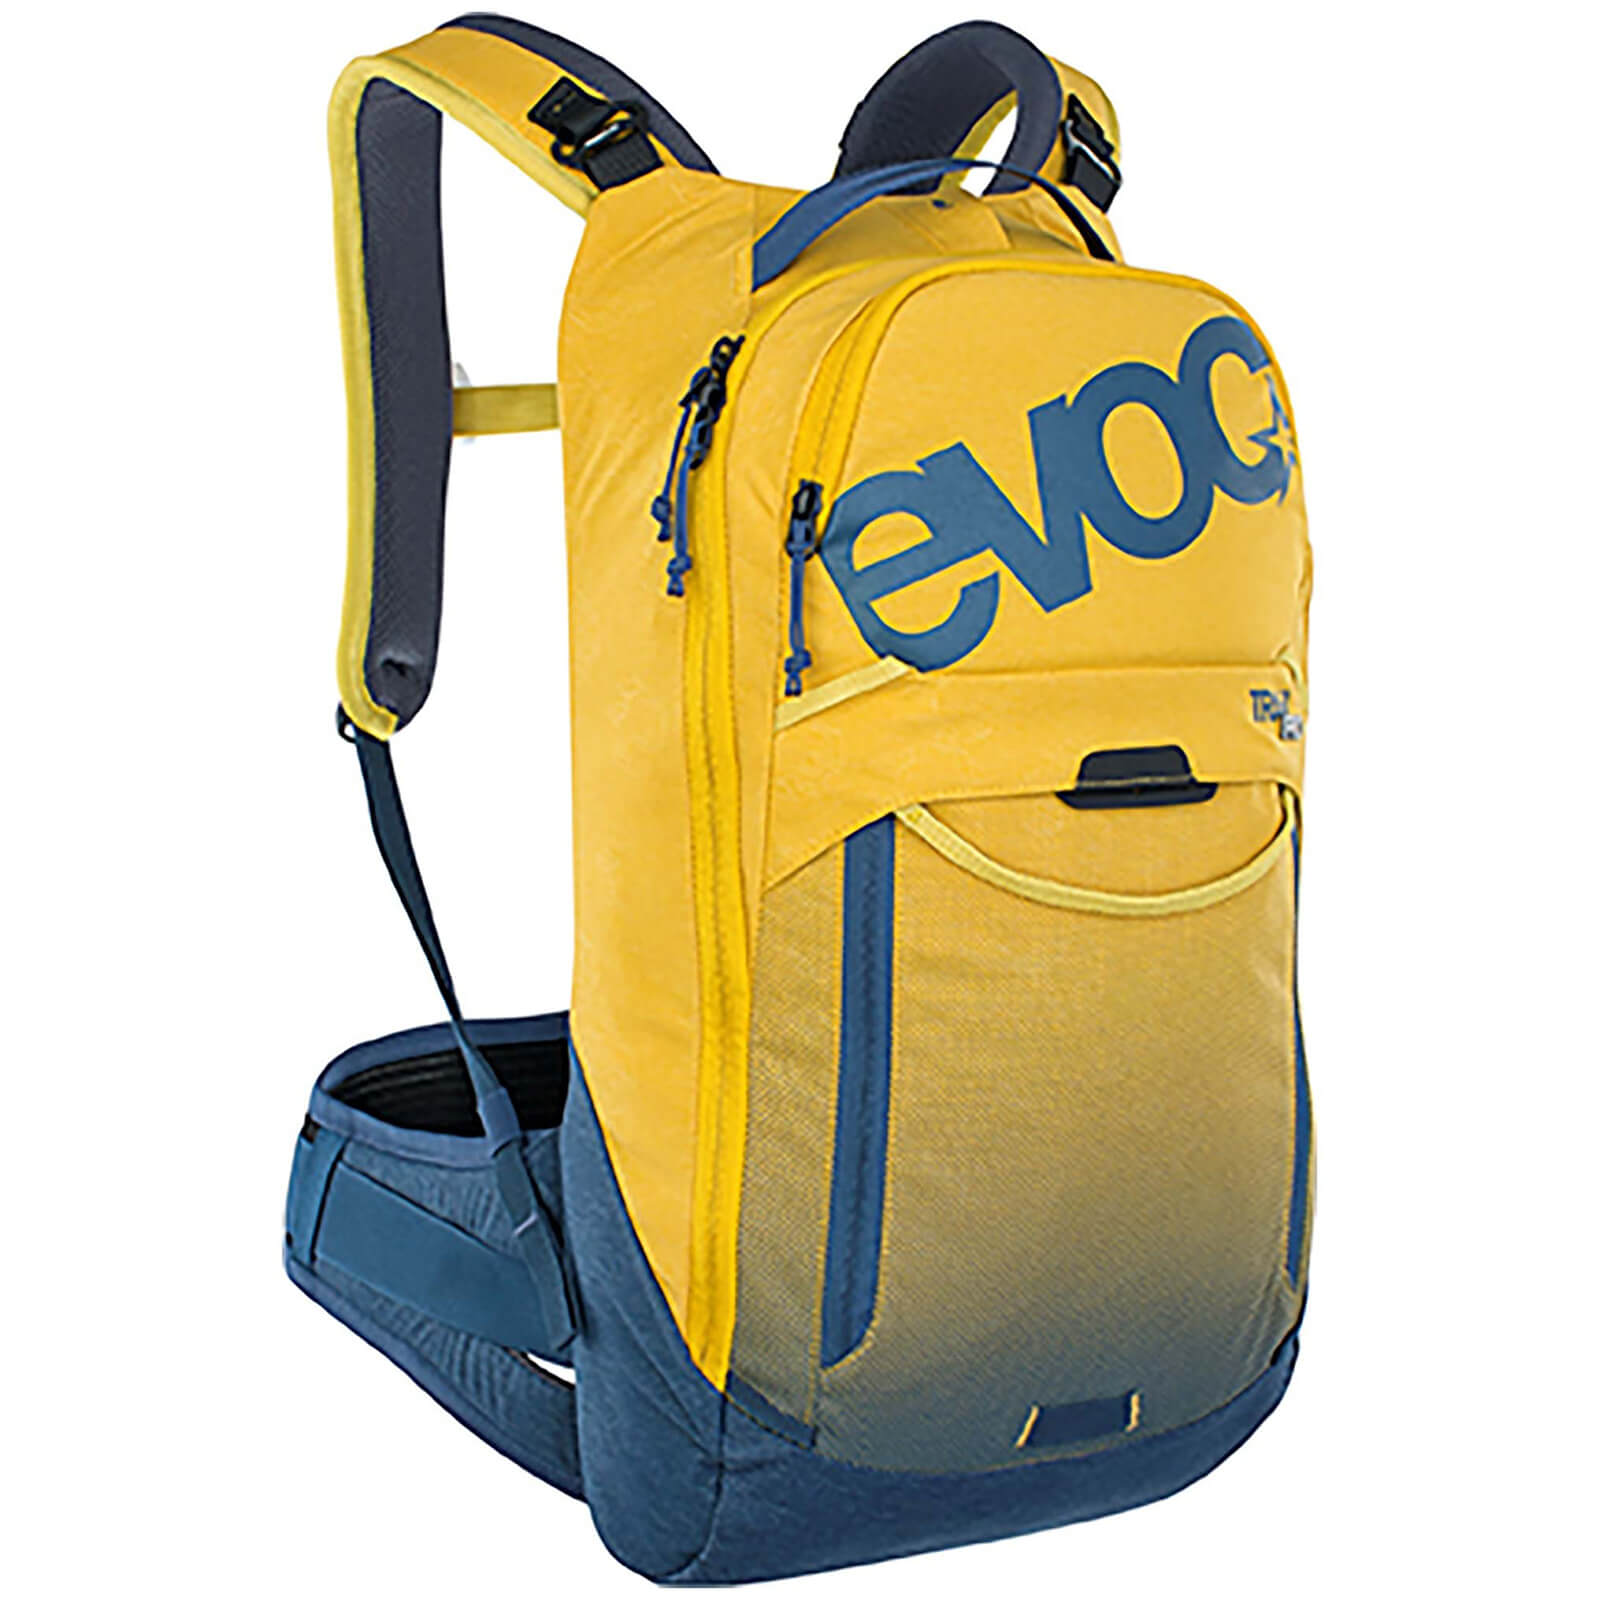 Evoc Trail Pro Protector 10L Backpack - S/M - Curry/Denim